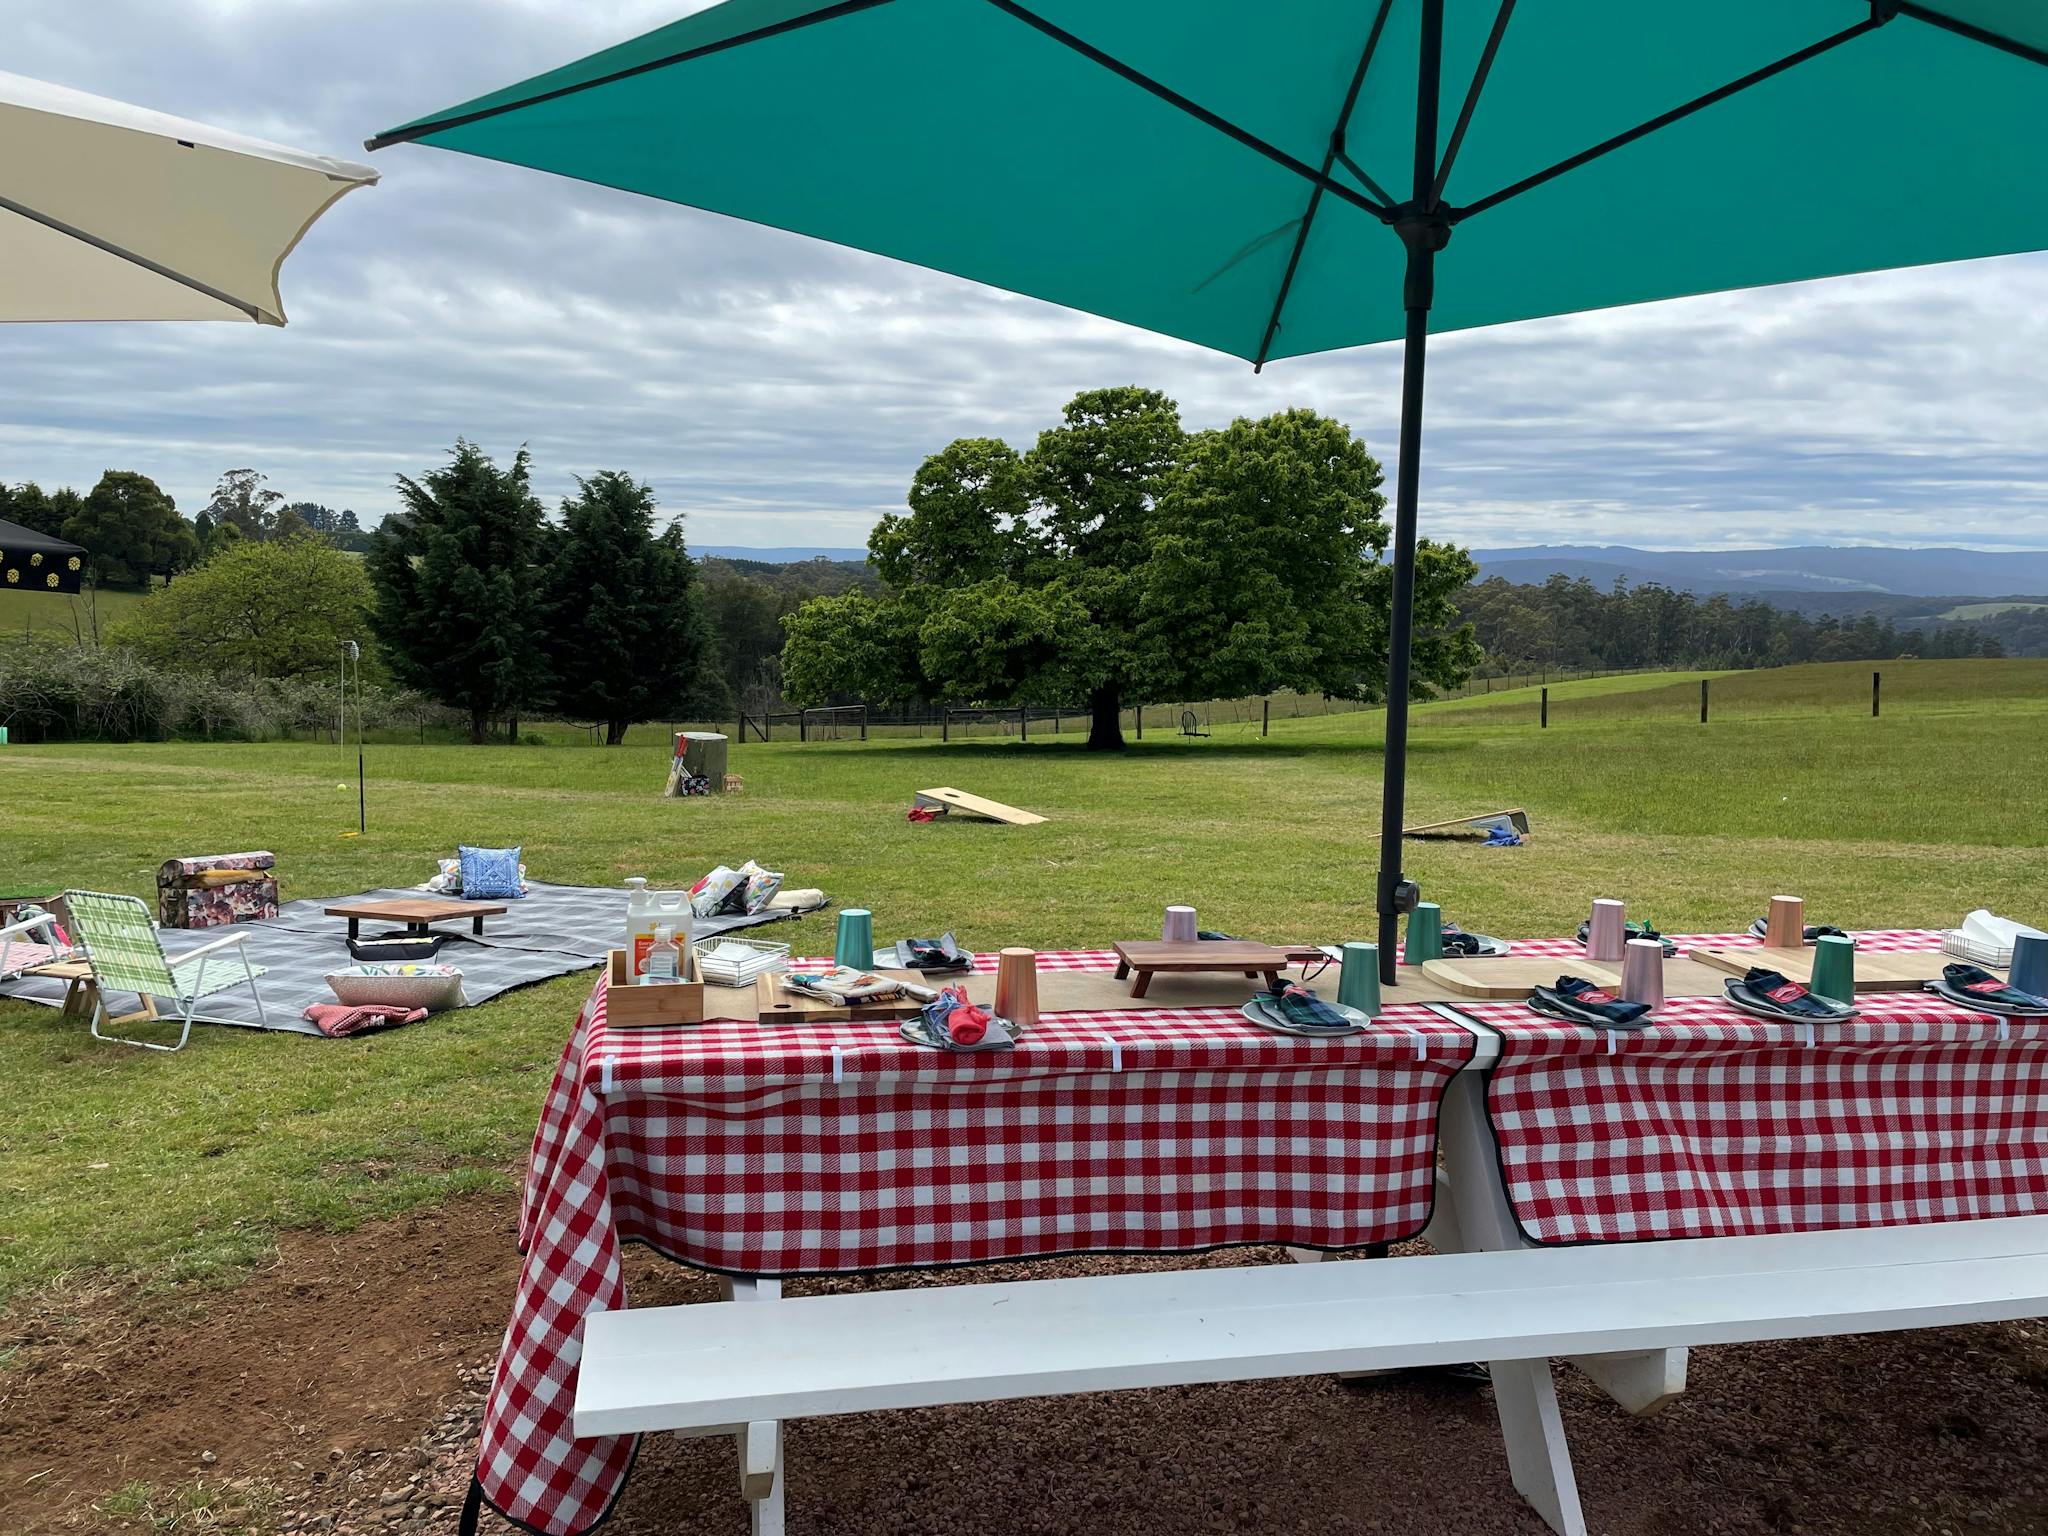 A picnic table with a red and white checked table cloth with a blue umbrella in a paddock